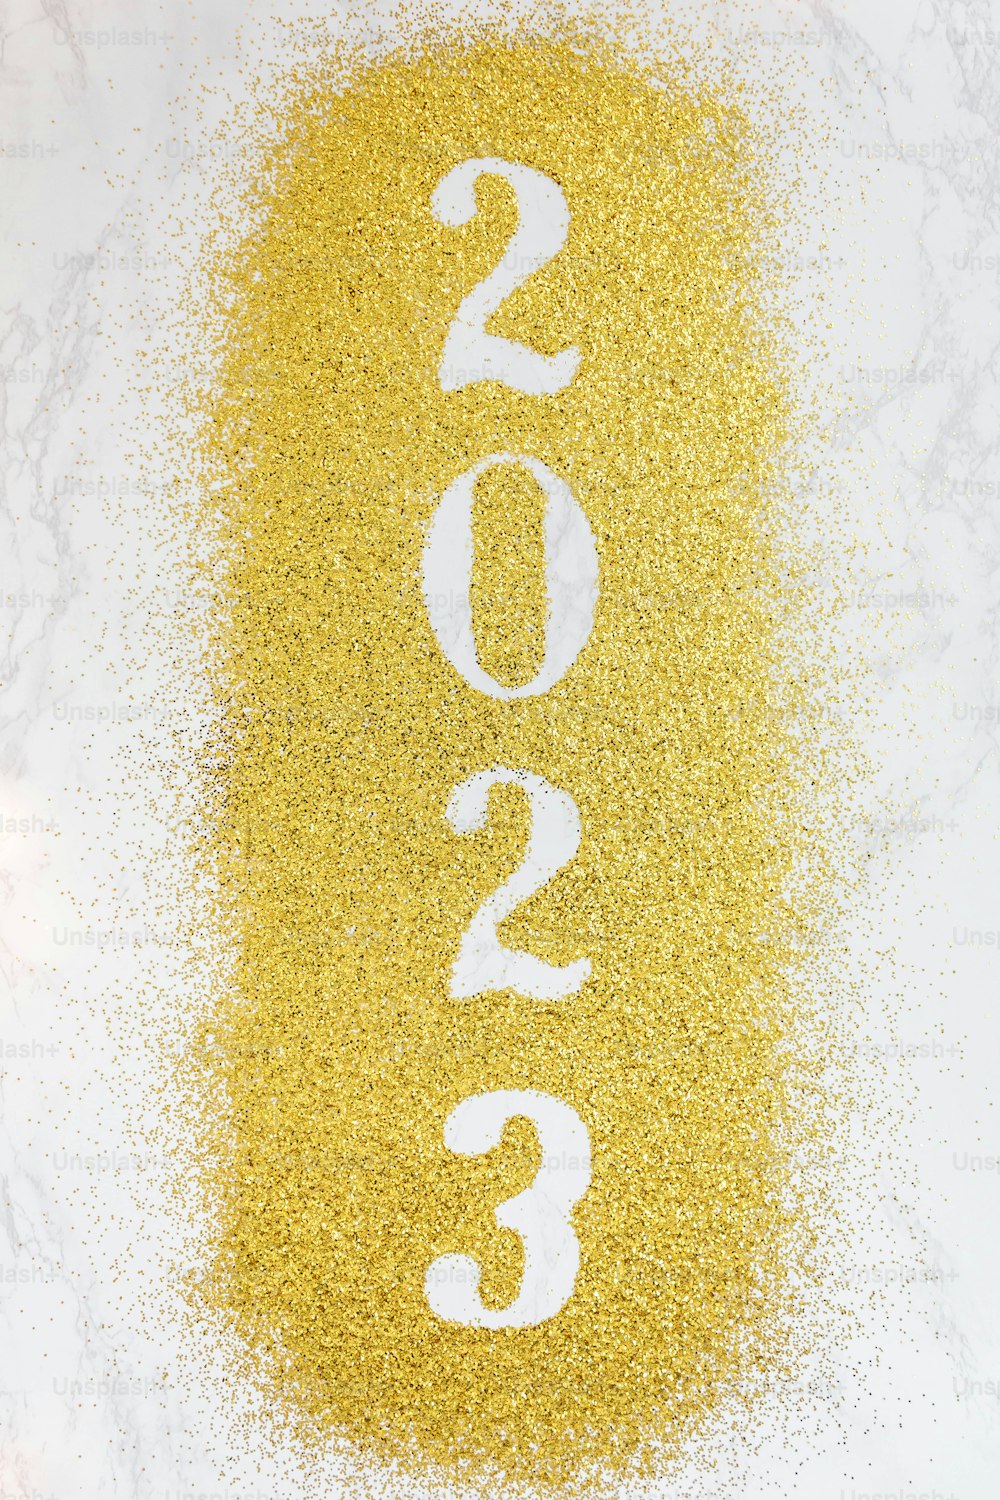 a white and yellow background with the year 2013 and 2013 written on it